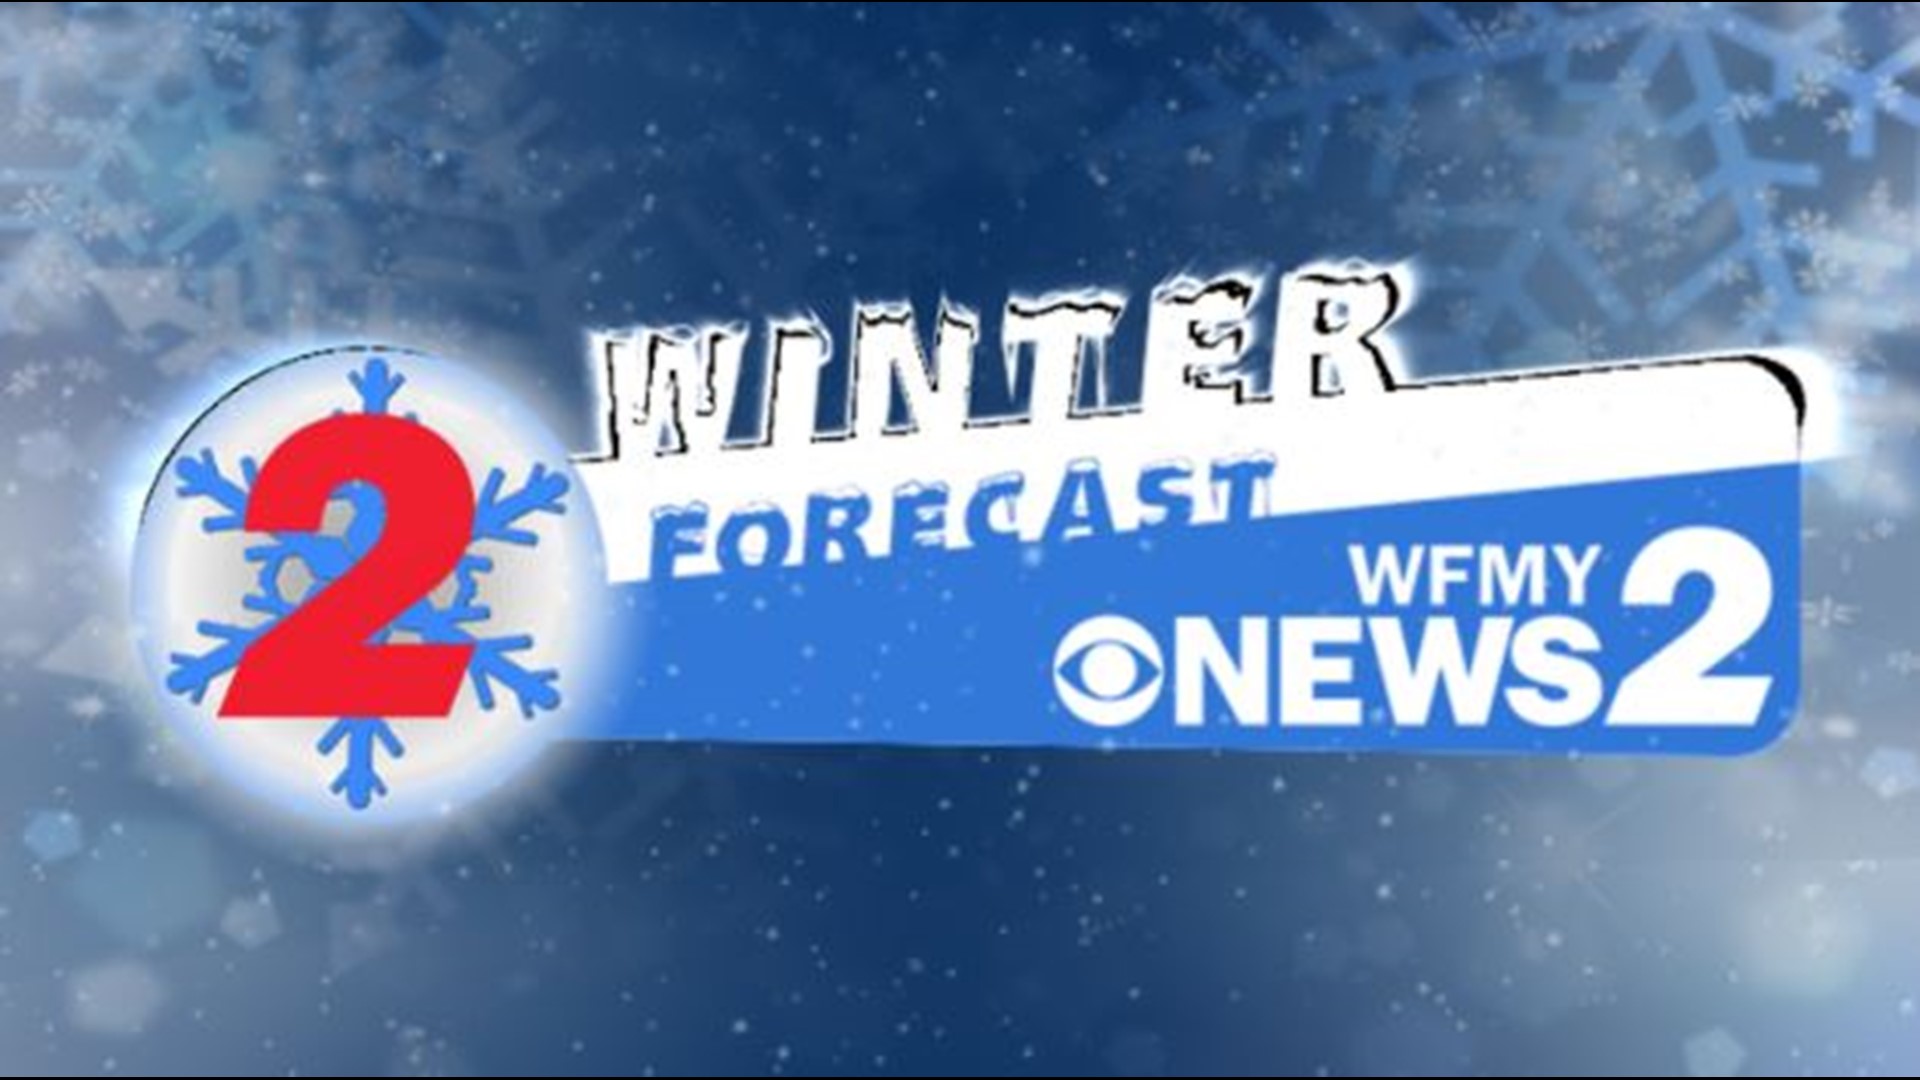 We're into the month of December, and it's time to take a look at what the 2020-2021 winter may bring for the Piedmont-Triad.